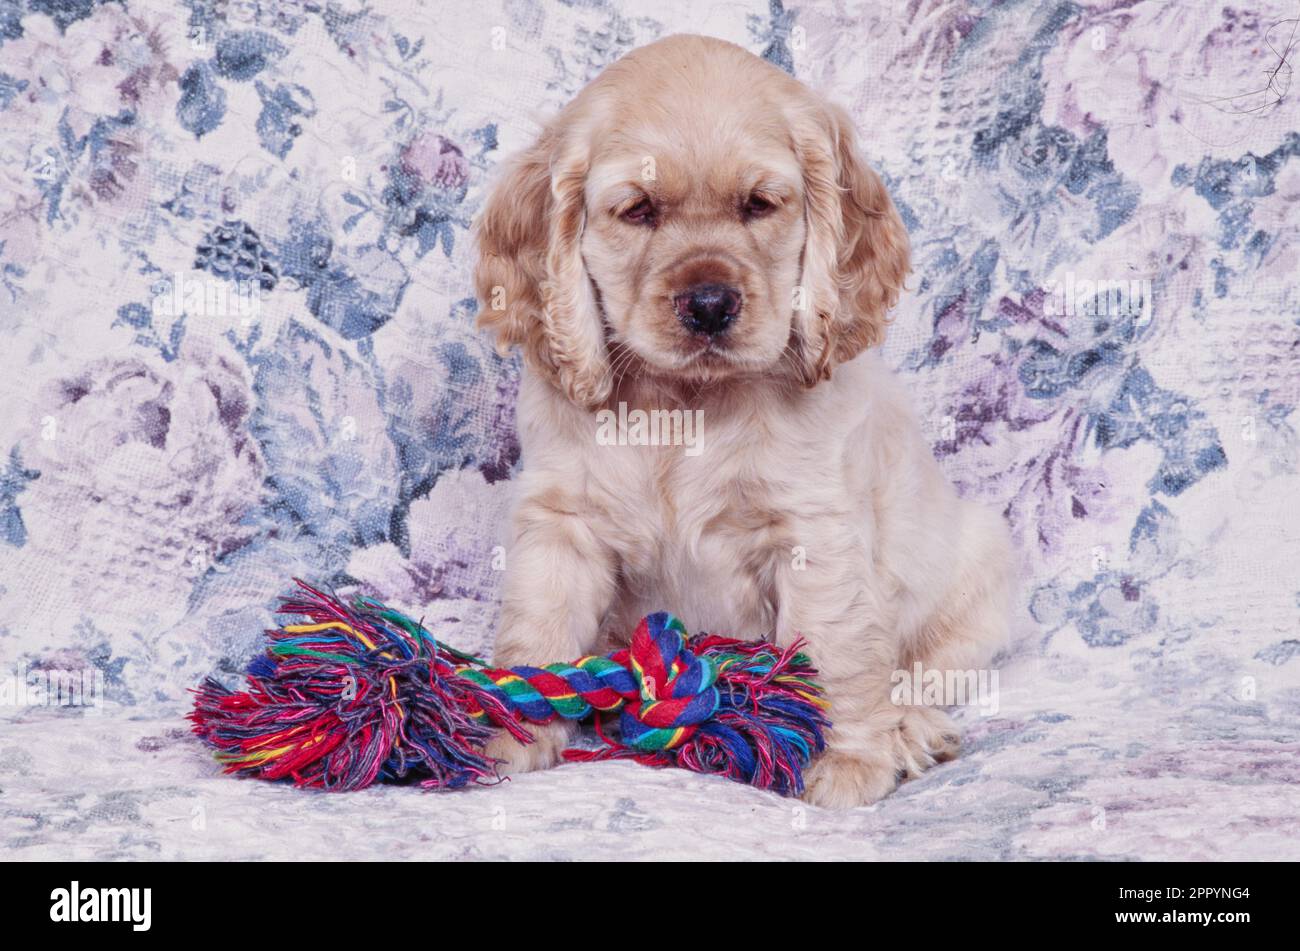 American Cocker Spaniel puppy laying on floral couch with multi-colored rope toy Stock Photo